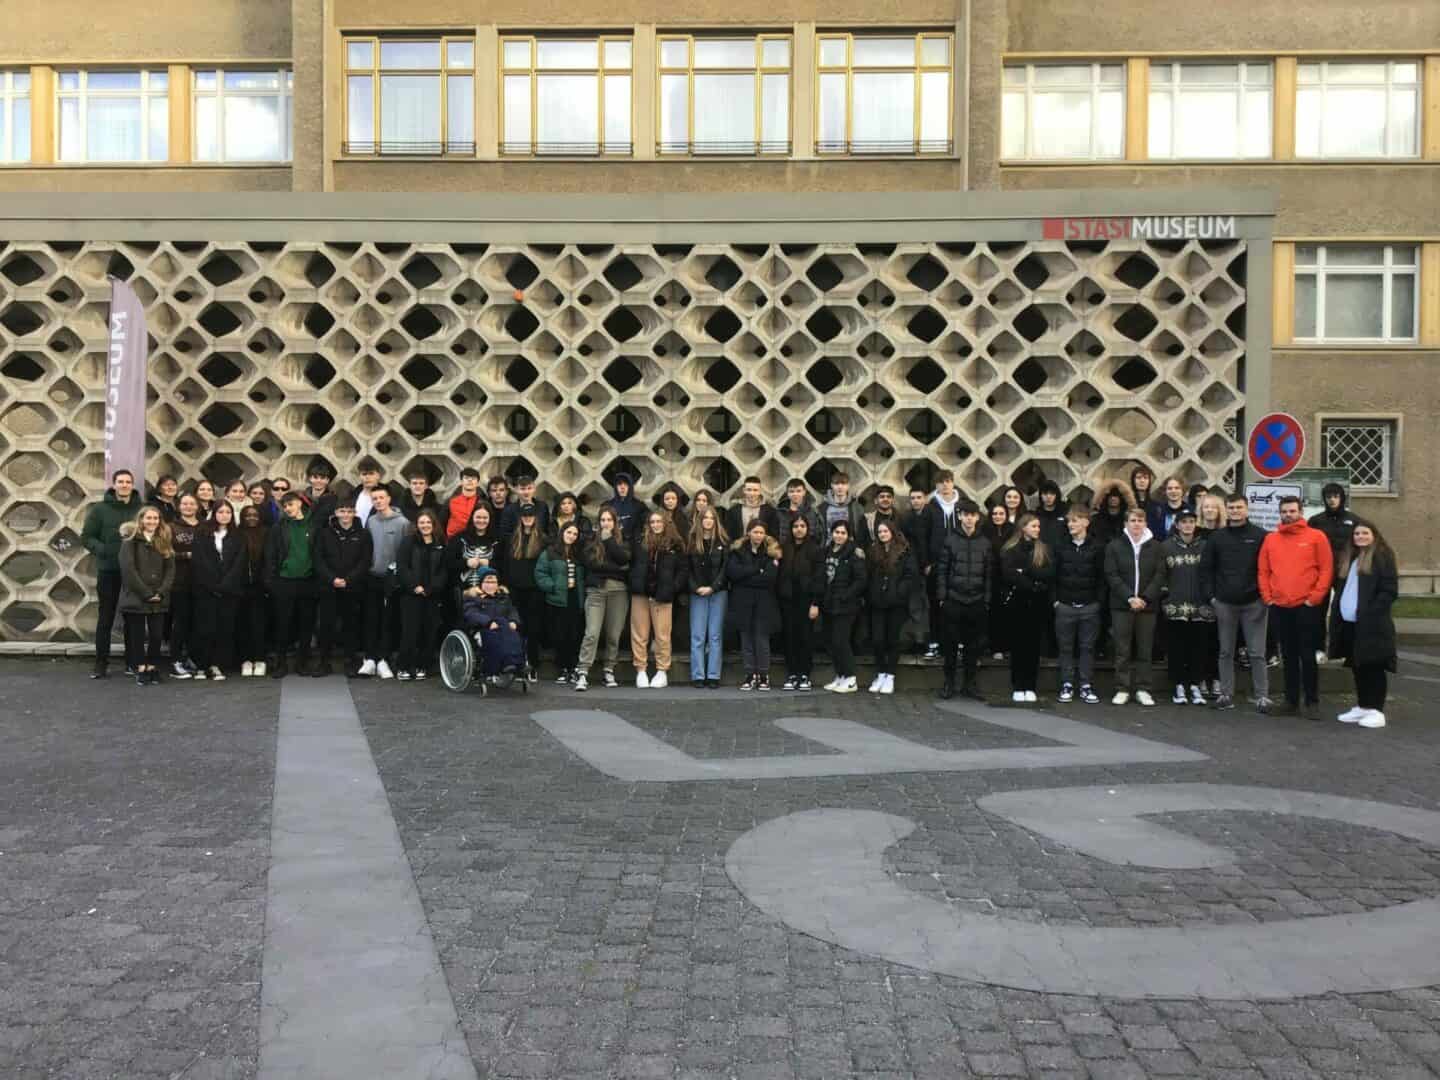 Students stand in front of the Stasi Museum